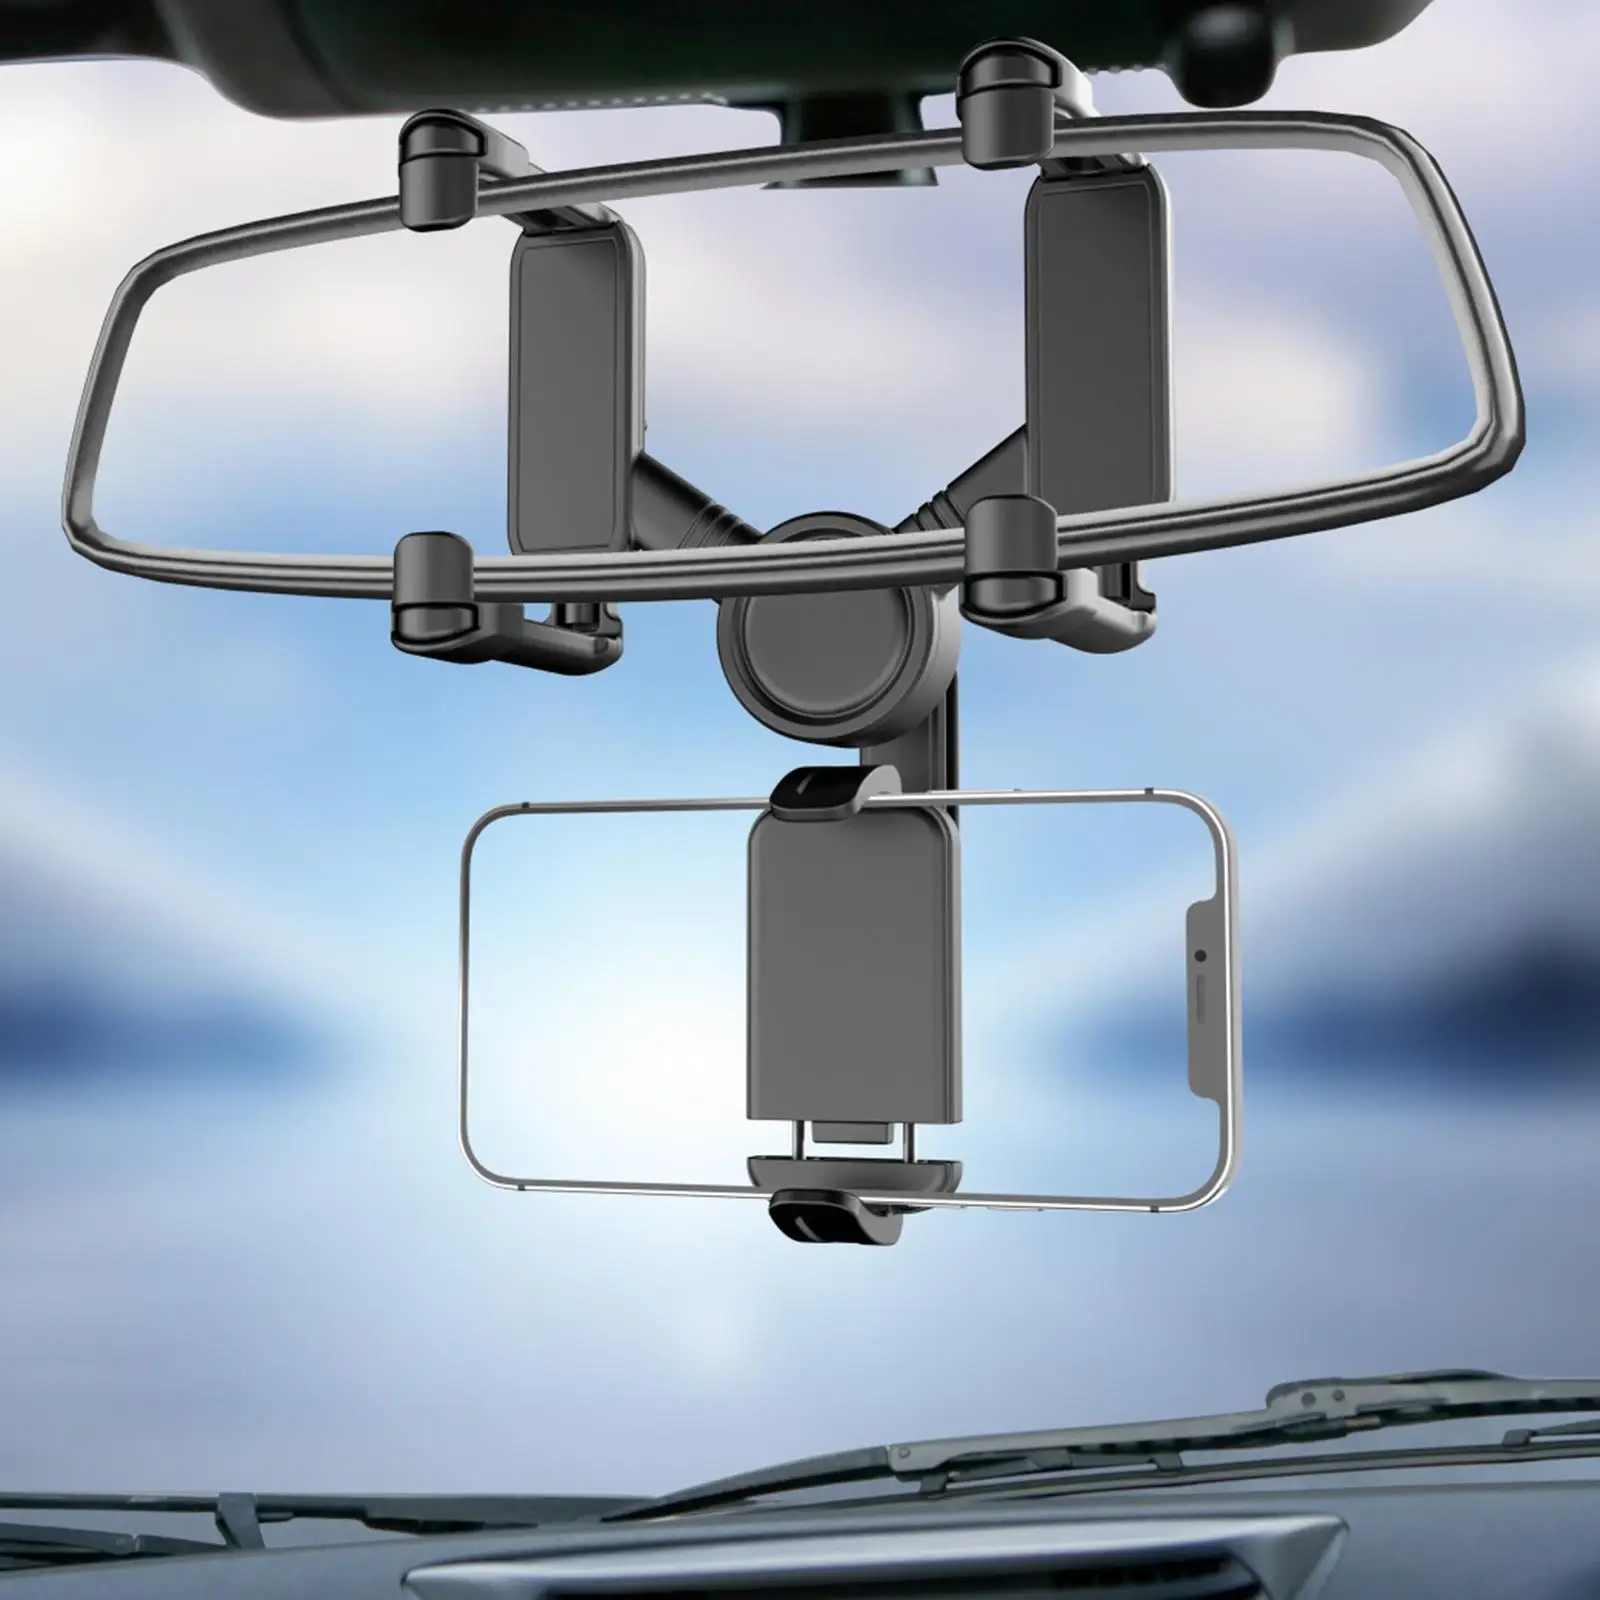 Auto Rear View Mirror Phone Holder 360 Degree Rotatable Retractable Multifunctional Adjustable Cradle Fits for Smartphone GPS